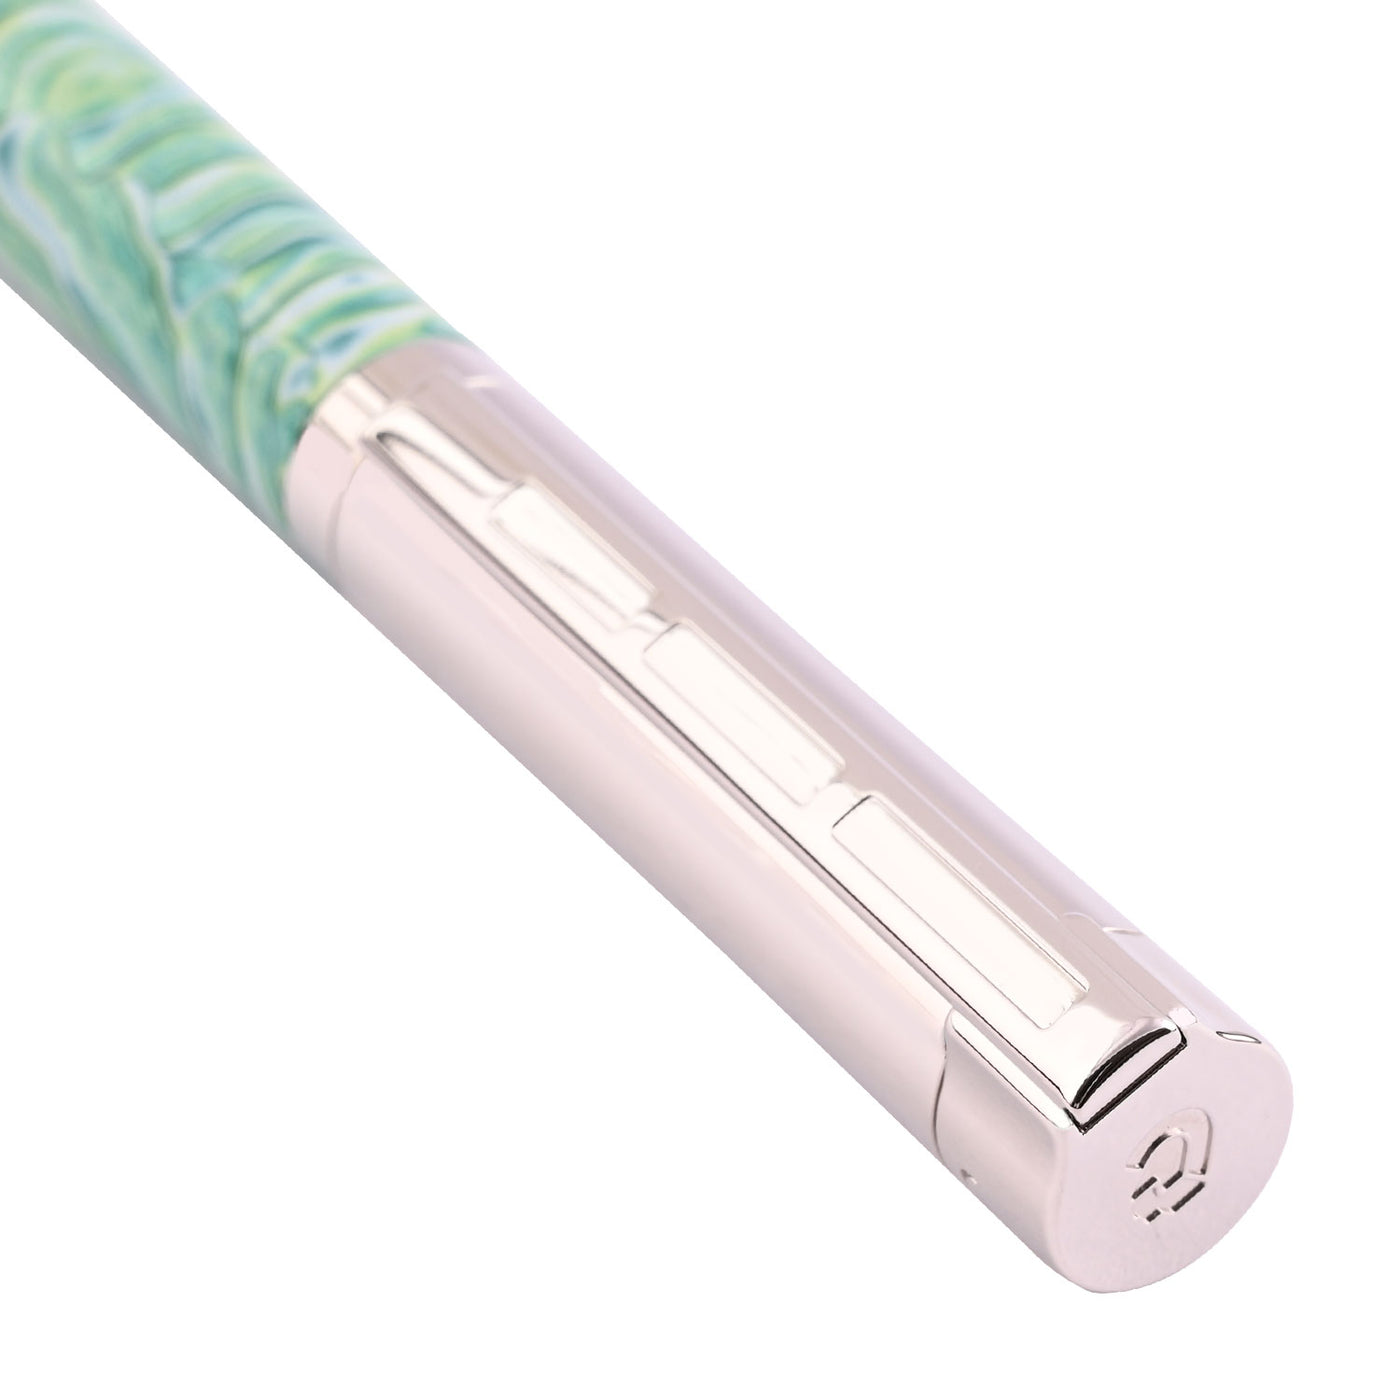 Staedtler Premium Pen of the Season Fountain Pen - Green CT (Limited Edition) 4